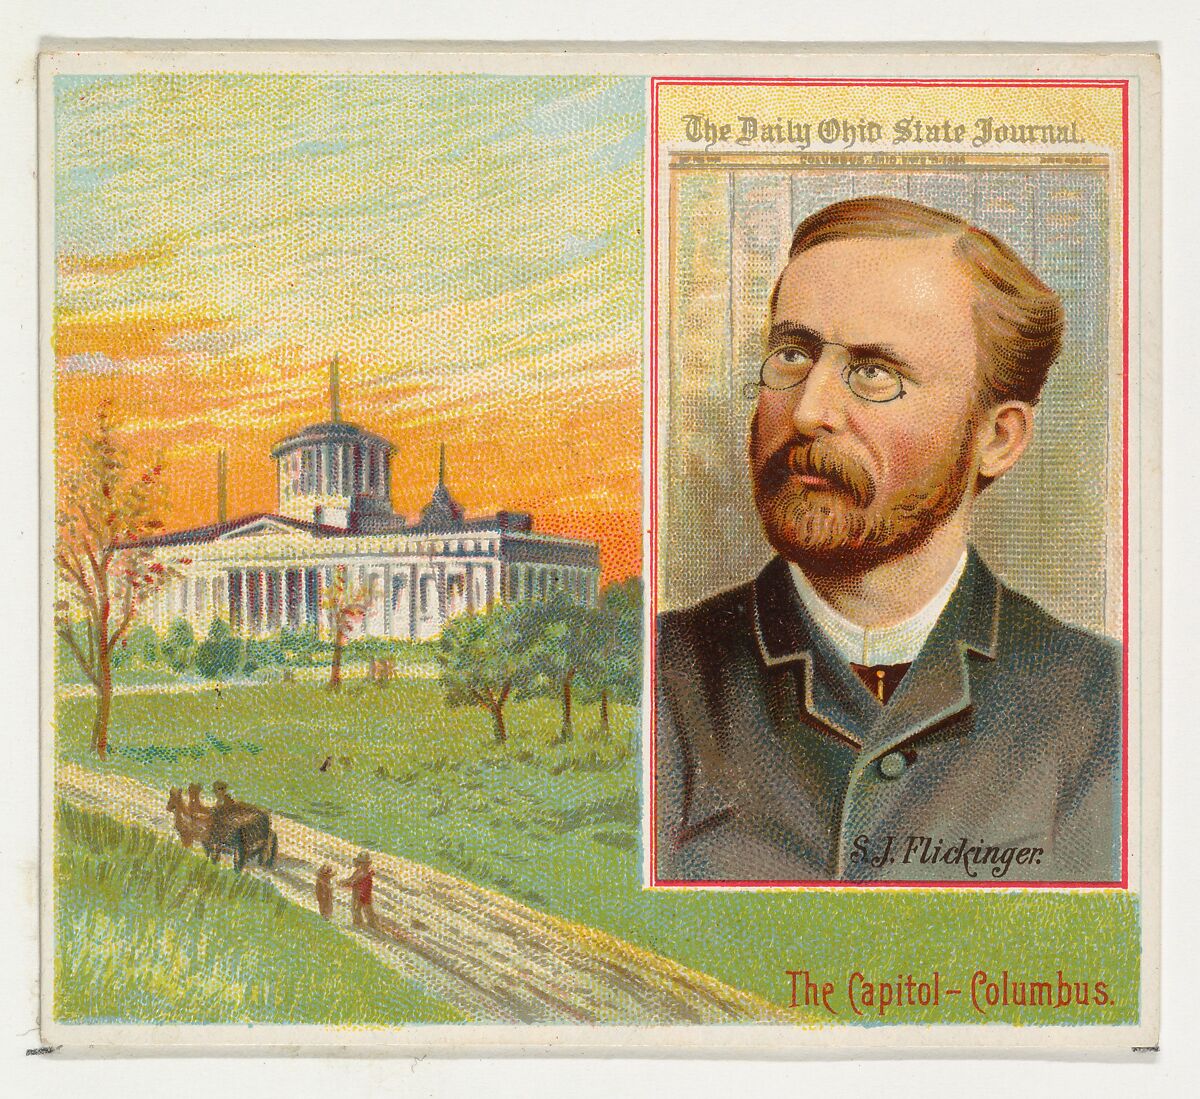 S.J. Flickinger, The Columbus Daily Ohio State Journal, from the American Editors series (N35) for Allen & Ginter Cigarettes, Issued by Allen &amp; Ginter (American, Richmond, Virginia), Commercial color lithograph 